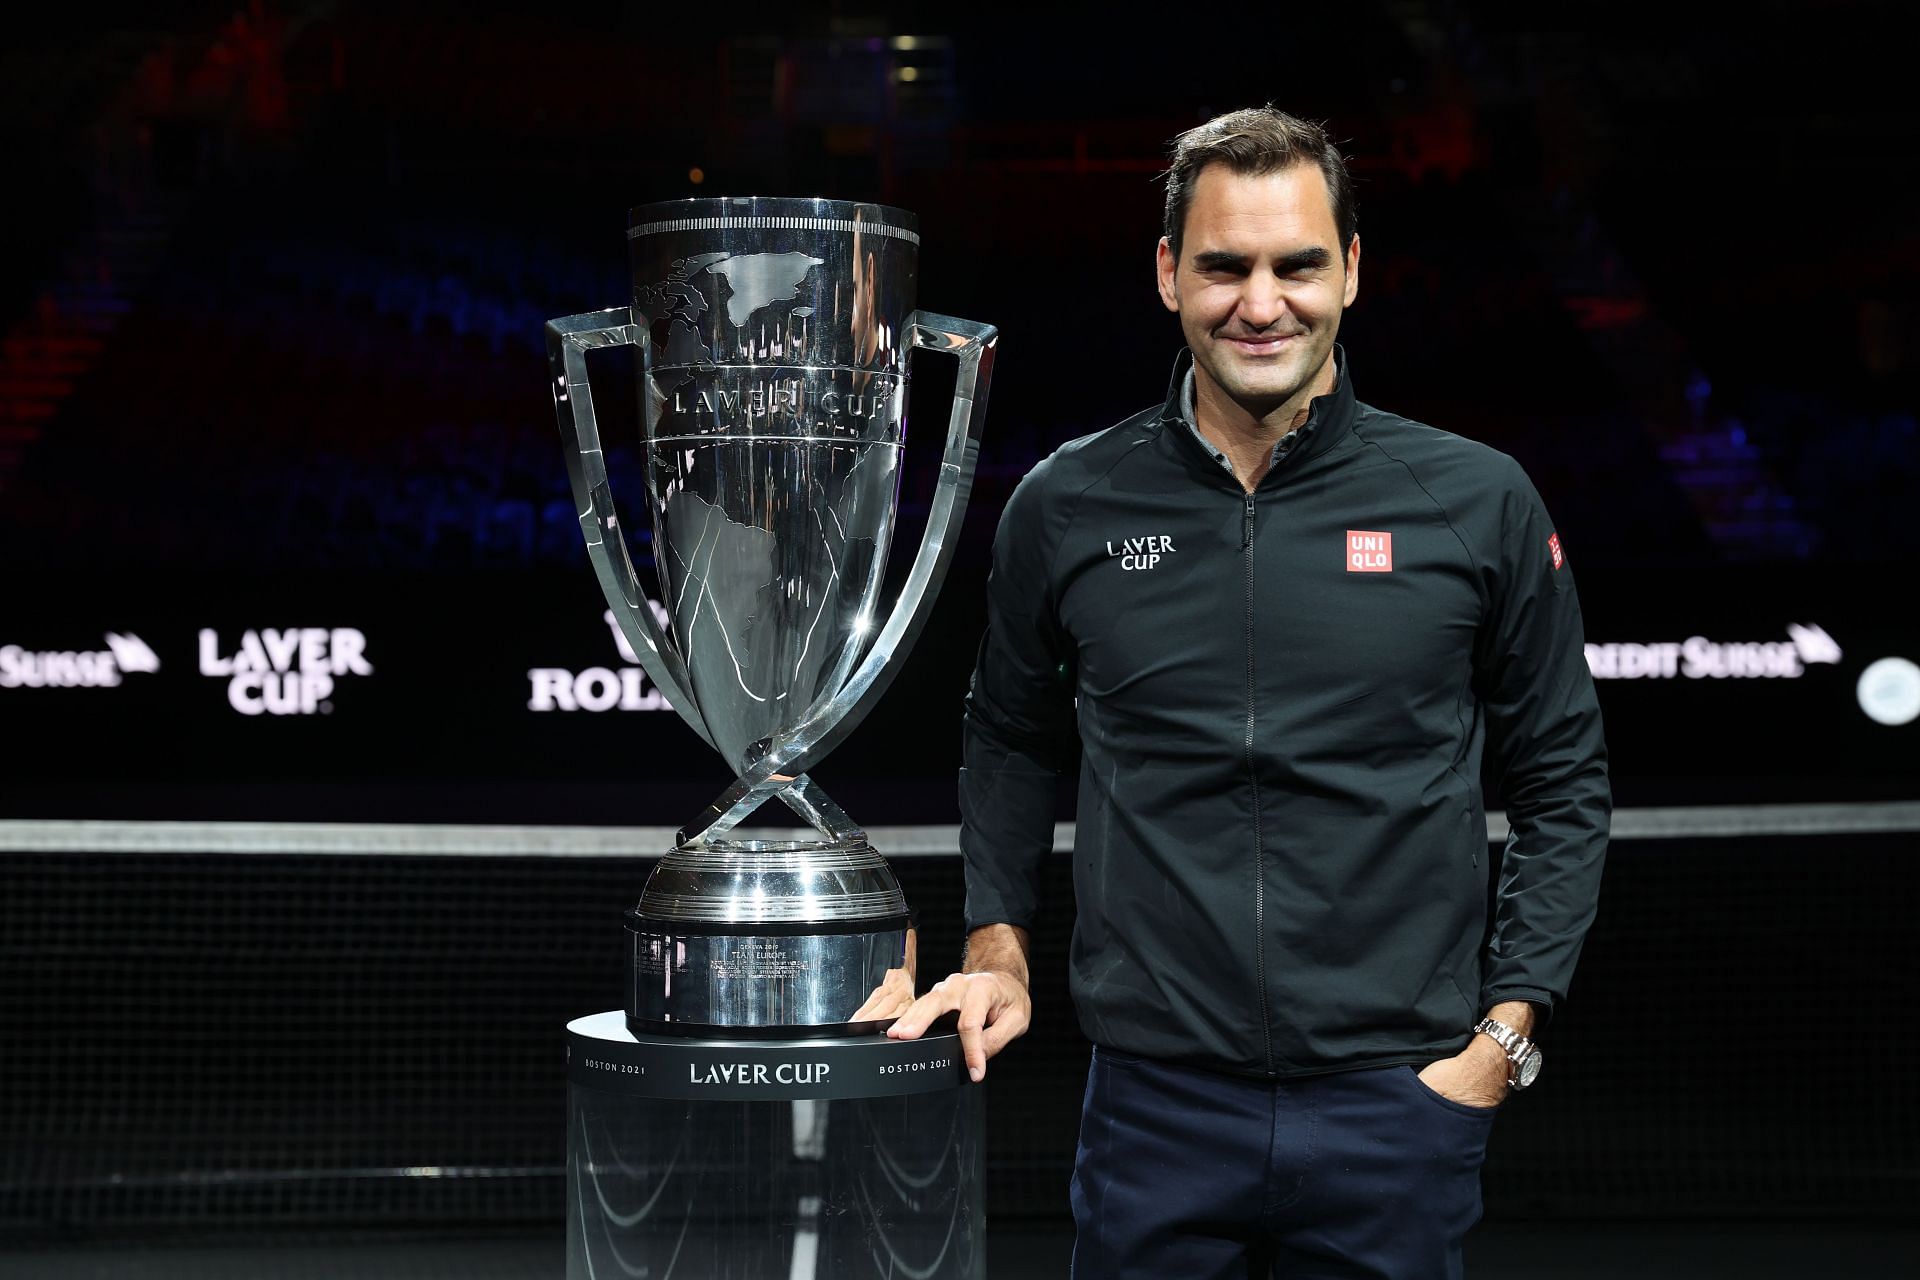 Roger Federer at the Laver Cup 2021 - Day 1